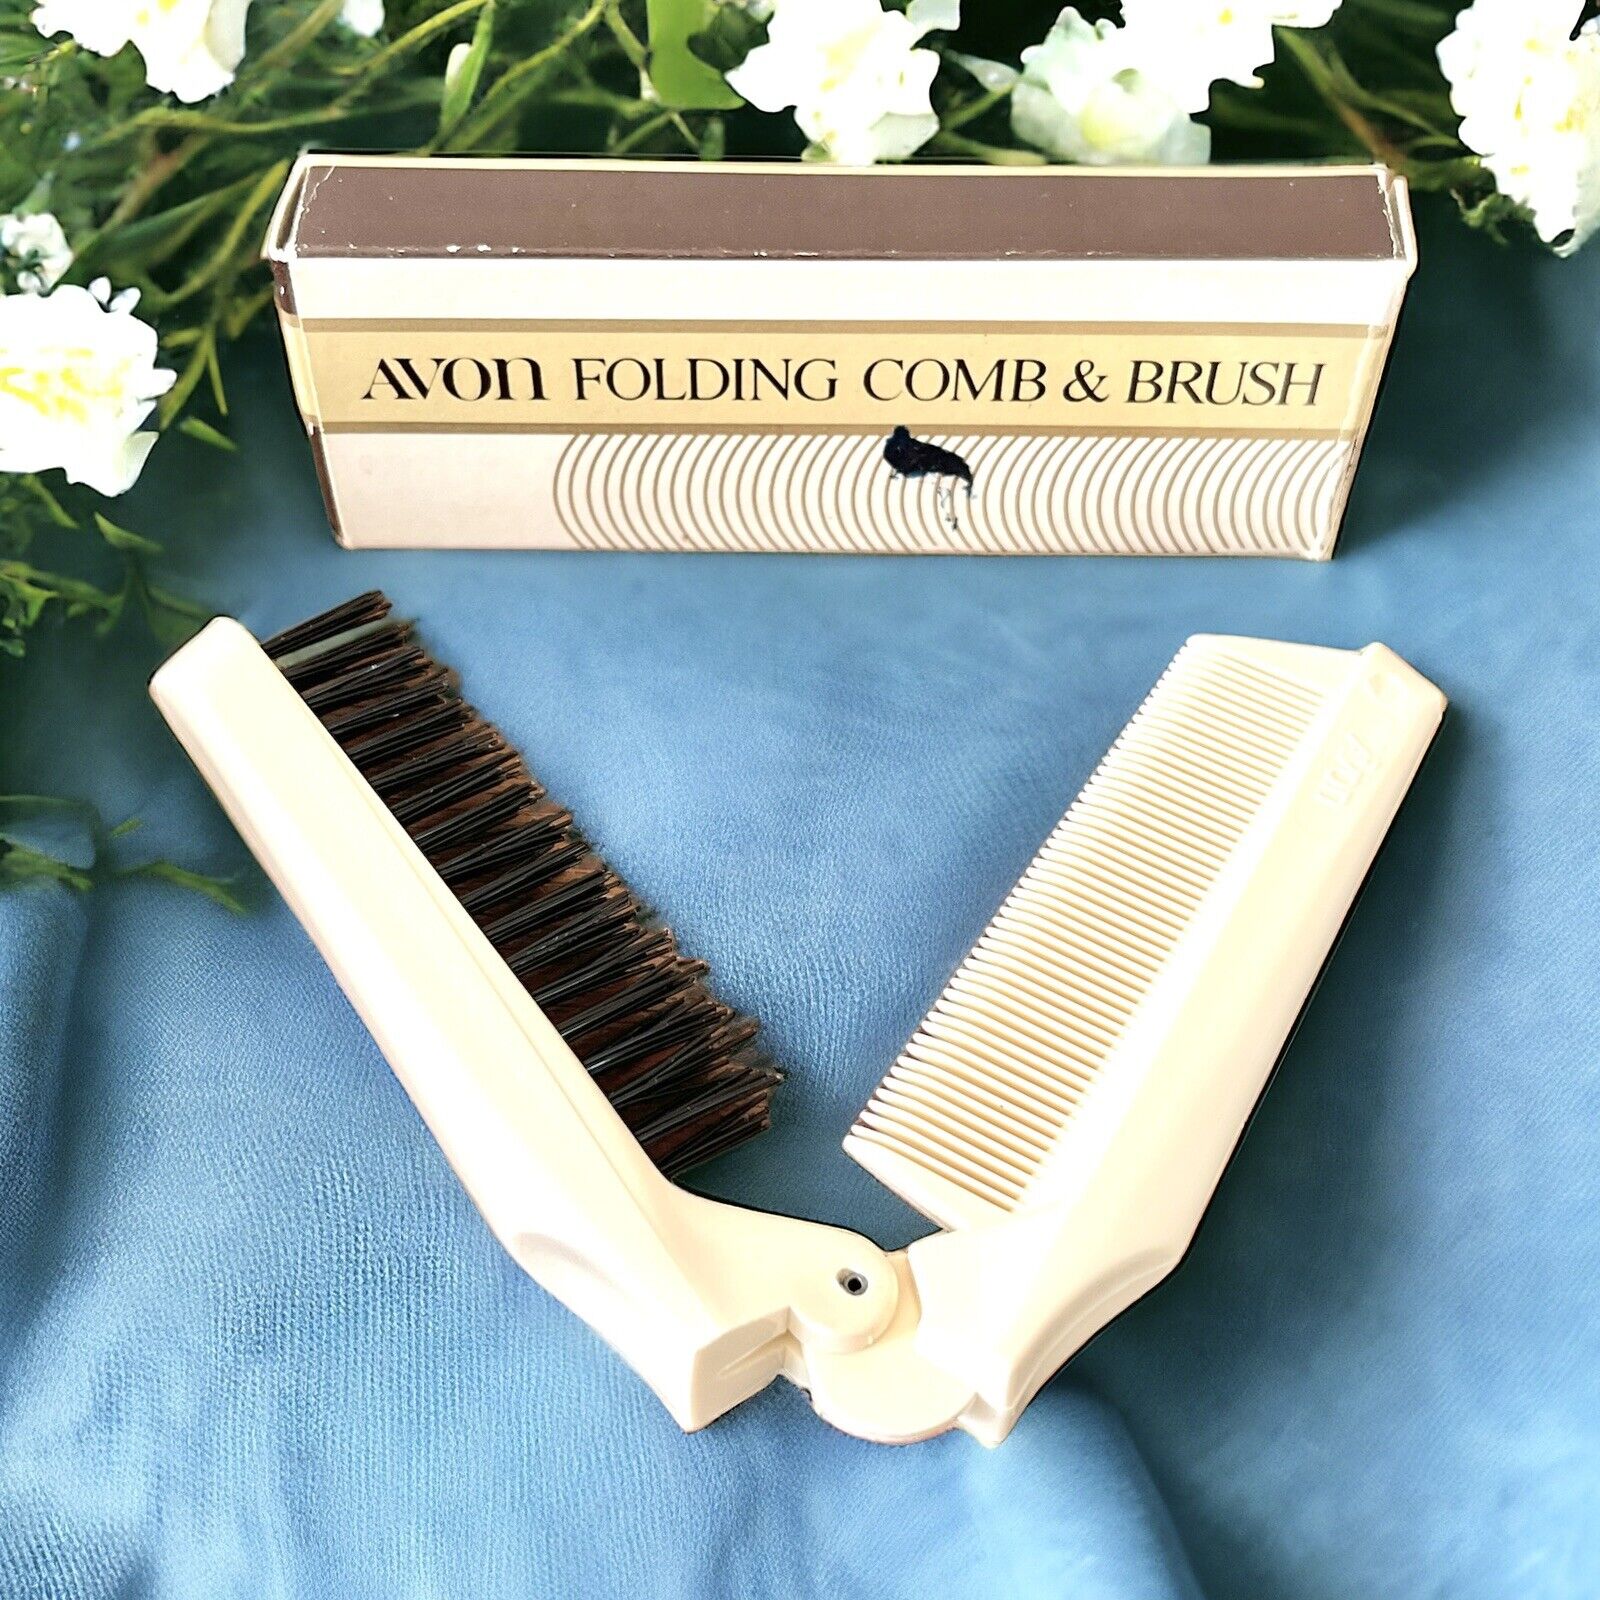 Vintage Avon FOLDING COMB & BRUSH New in the Box NOS